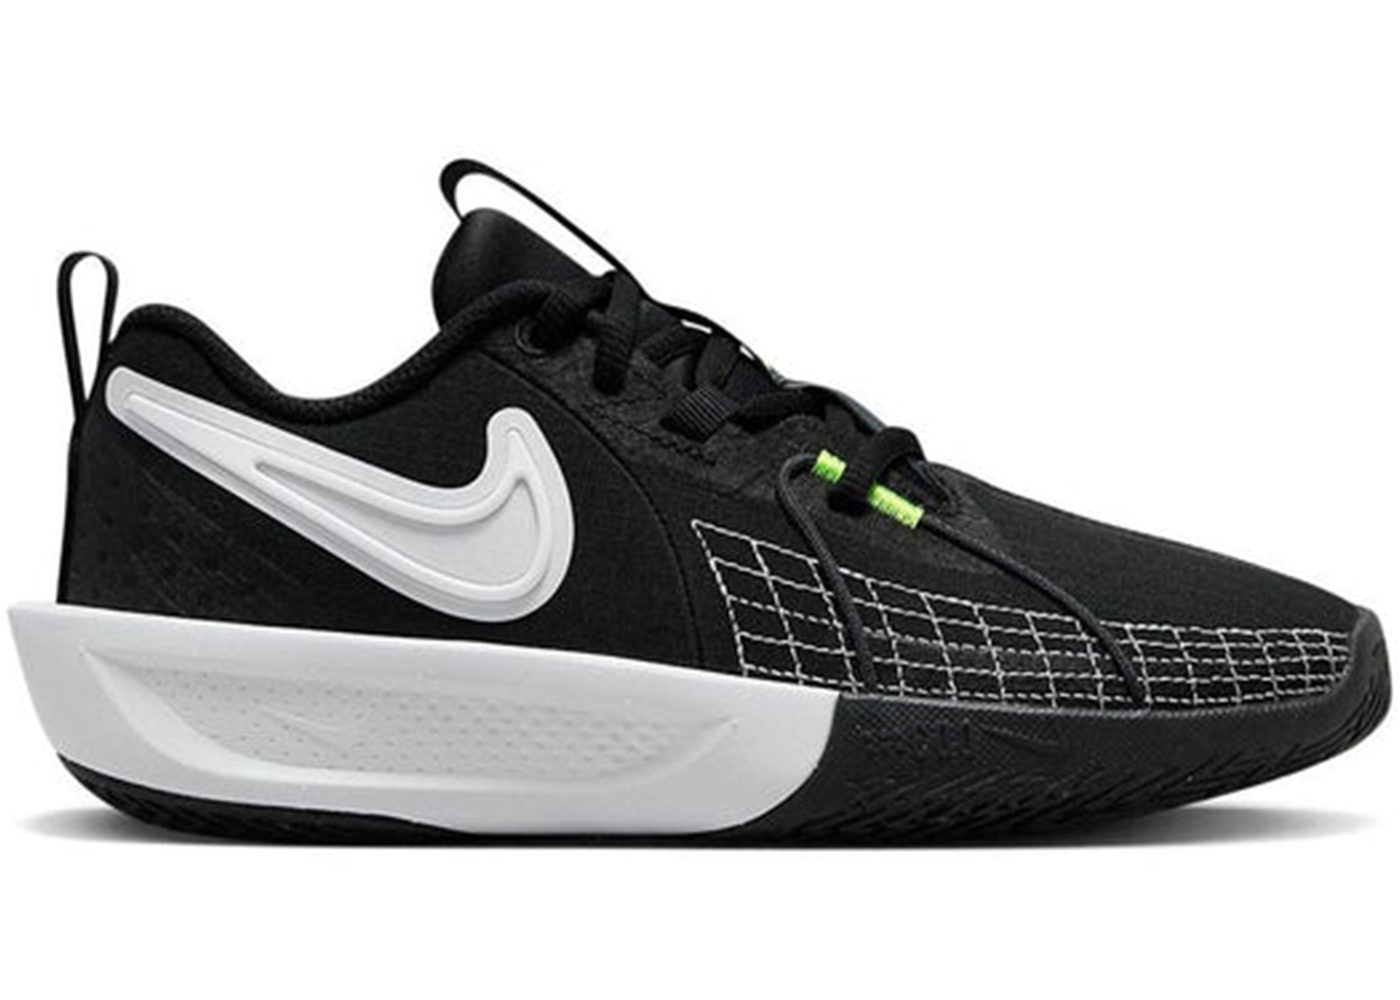 Nike Zoom GT Cut 3 Black Anthracite (GS)